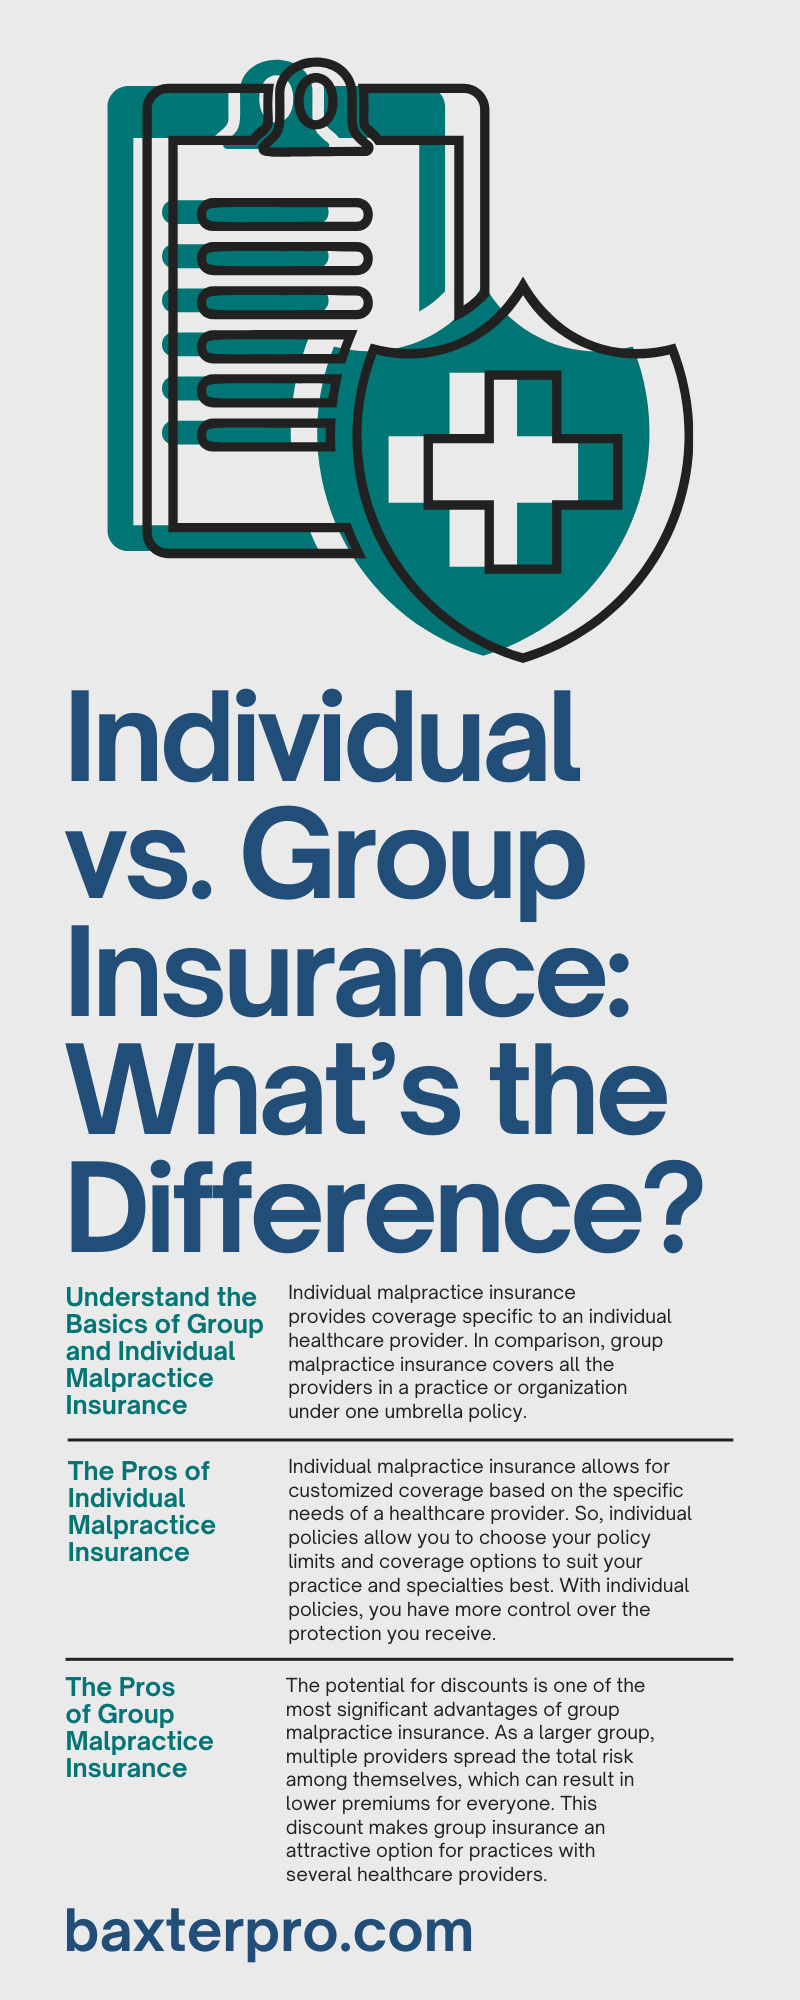 Individual vs. Group Insurance: What’s the Difference?